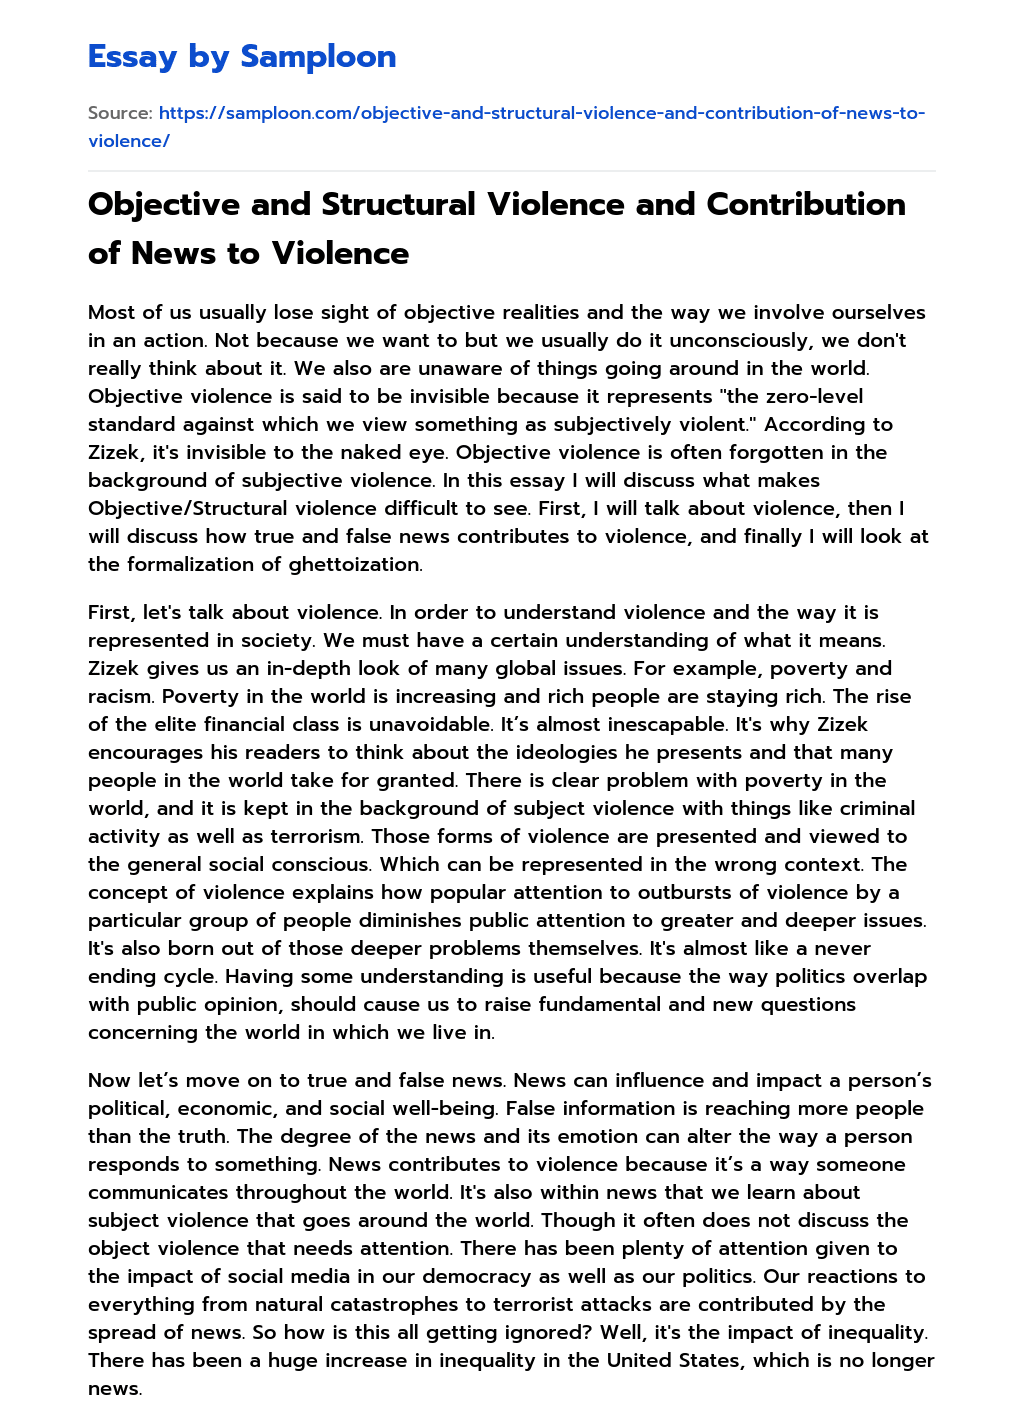 Objective and Structural Violence and Contribution of News to Violence essay